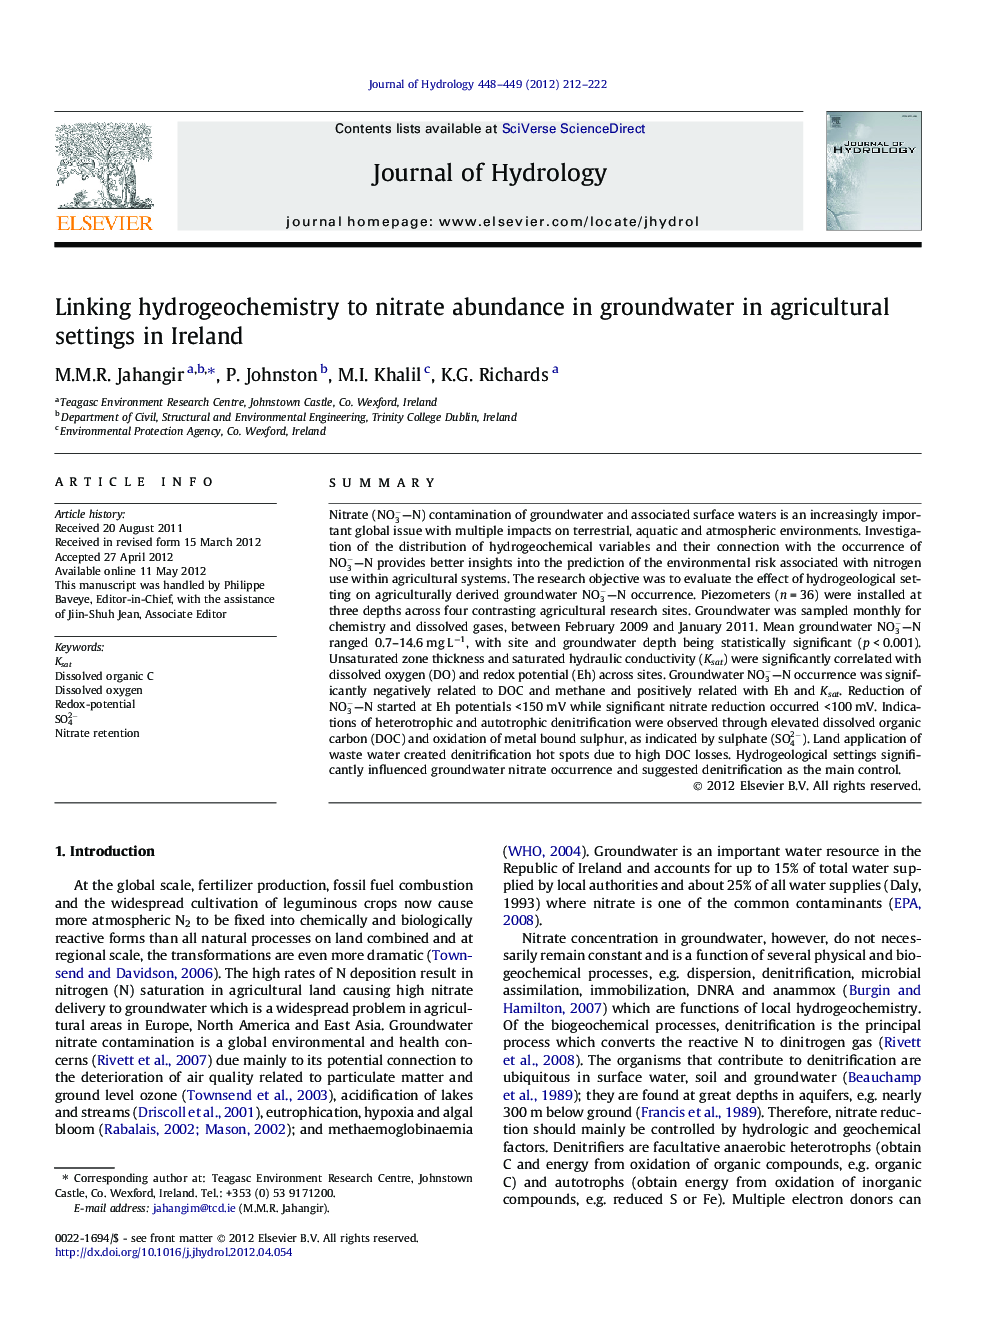 Linking hydrogeochemistry to nitrate abundance in groundwater in agricultural settings in Ireland